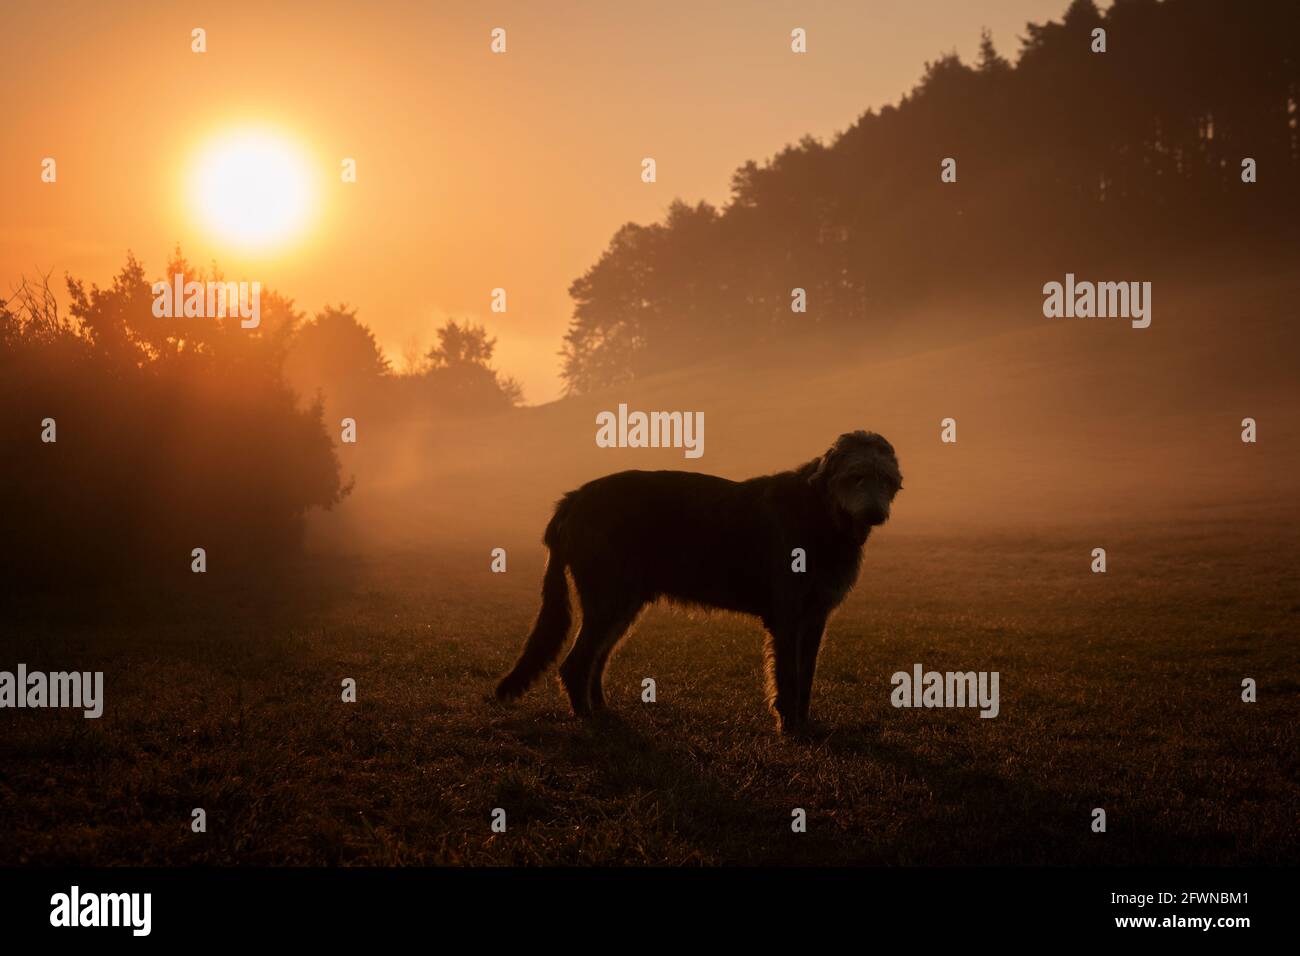 Irish Wolfhound in the meadow. Silhouette of a giant dog at the morning meadow. Rising sunset in background. Stock Photo